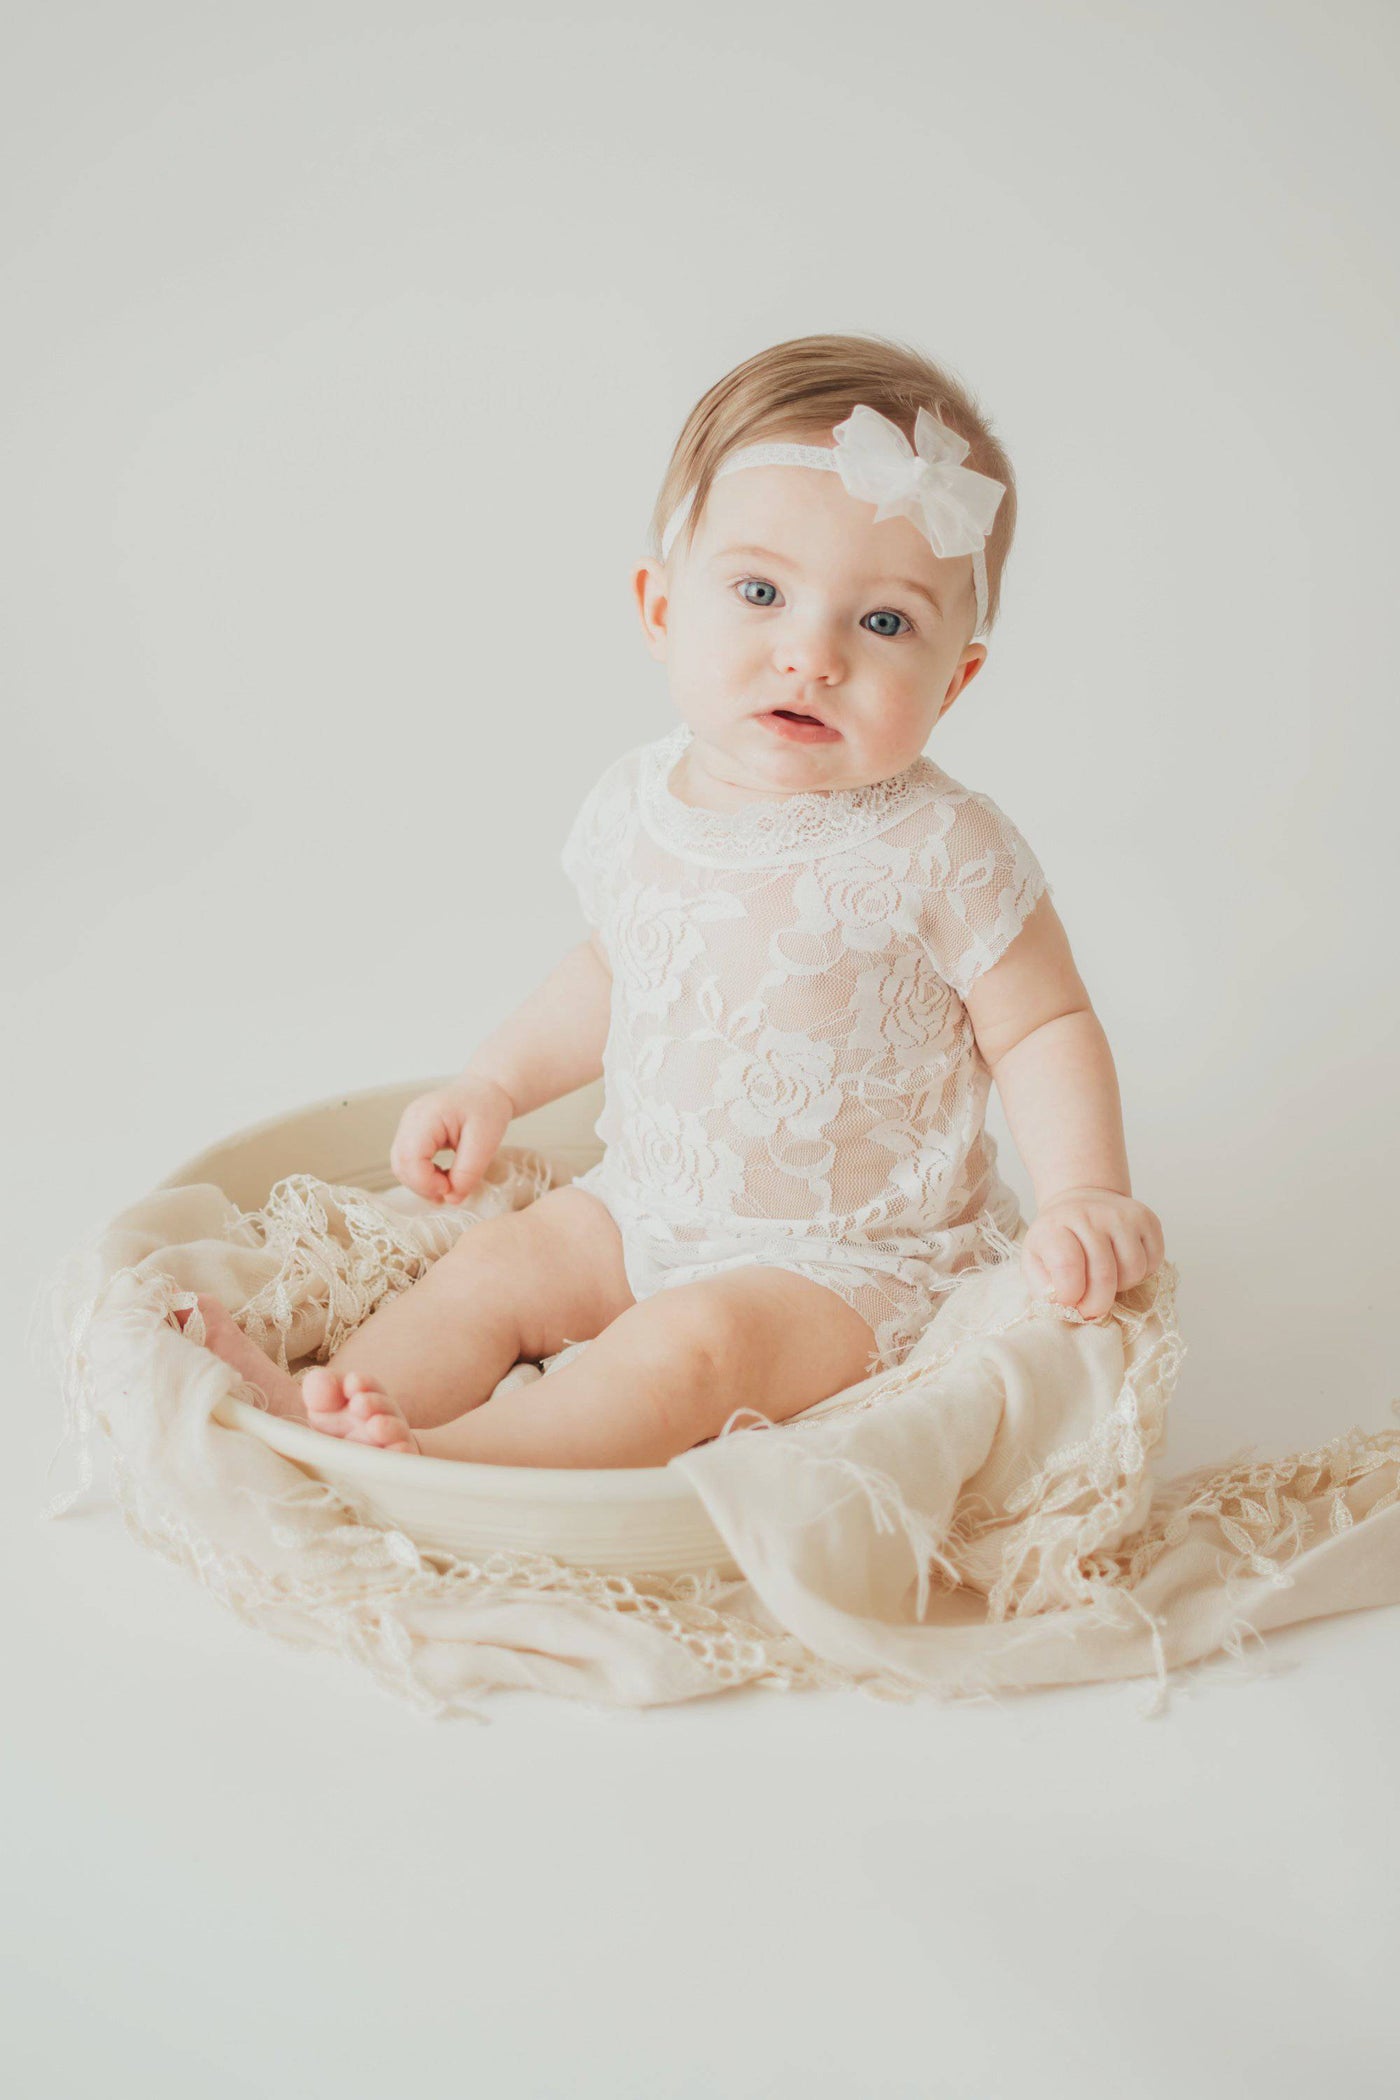 White Lace V-Back Newborn Romper with Ties - Beautiful Photo Props